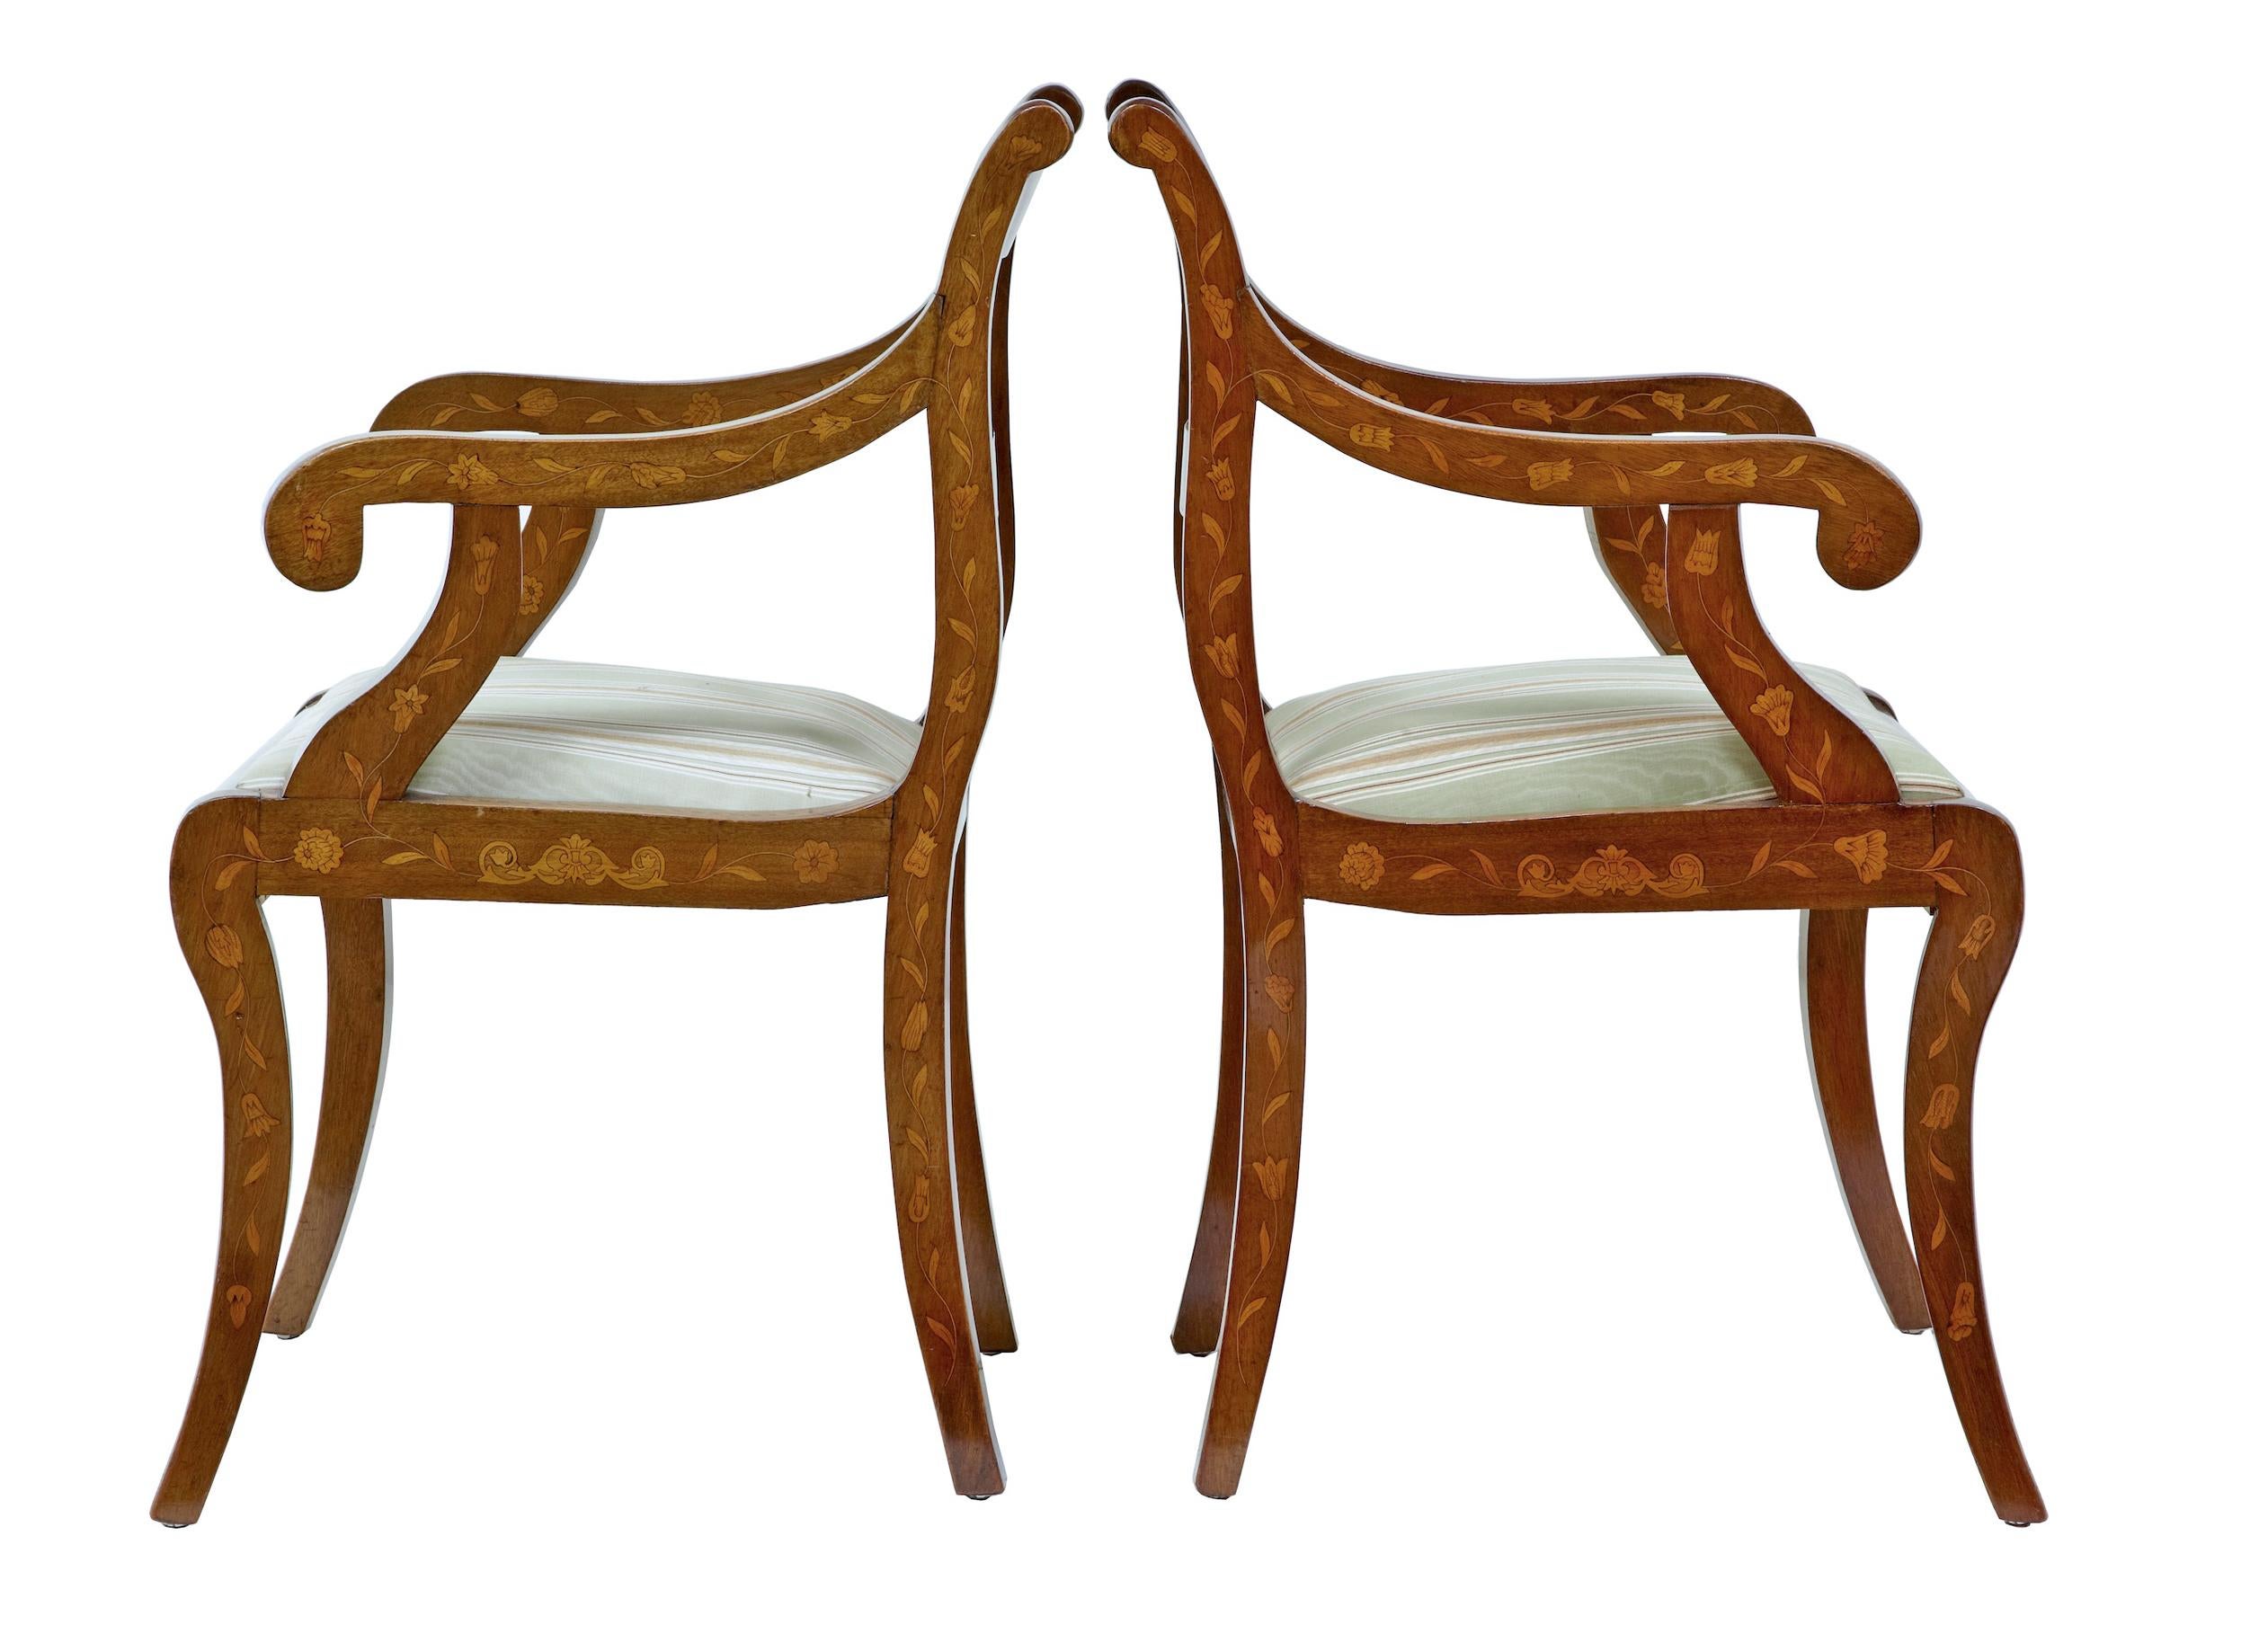 Pair of 19th century Dutch walnut marquetry armchairs, circa 1860.
Good quality pair of Dutch open armchairs. Shaped backs with scrolling arms, standing on sabre legs. Profusely inlaid on all surfaces with florals. With salt and pepper stringing to